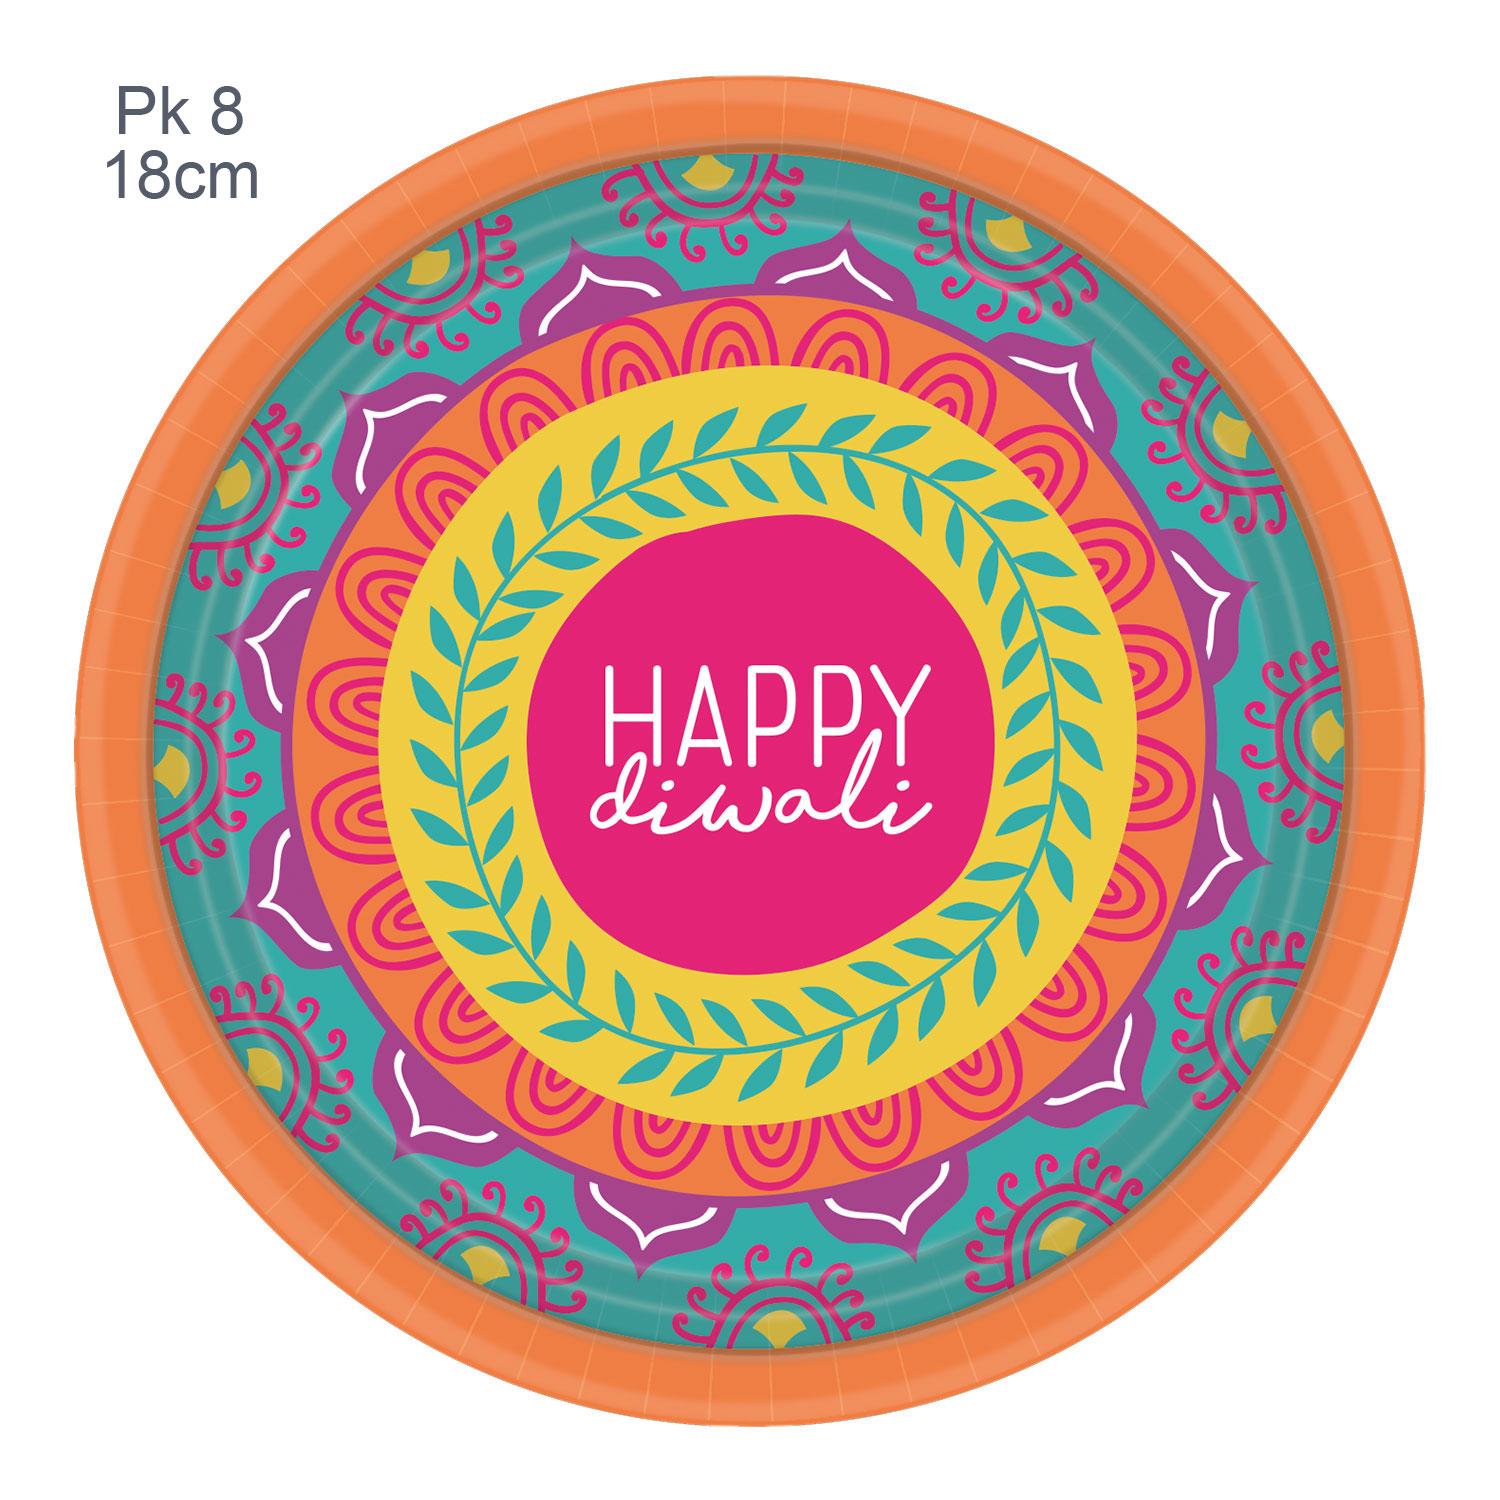 Diwali Celebrations Paper Plates 18cm pk8 by Amscan 542413 available here at Karnival Costumes online party shop